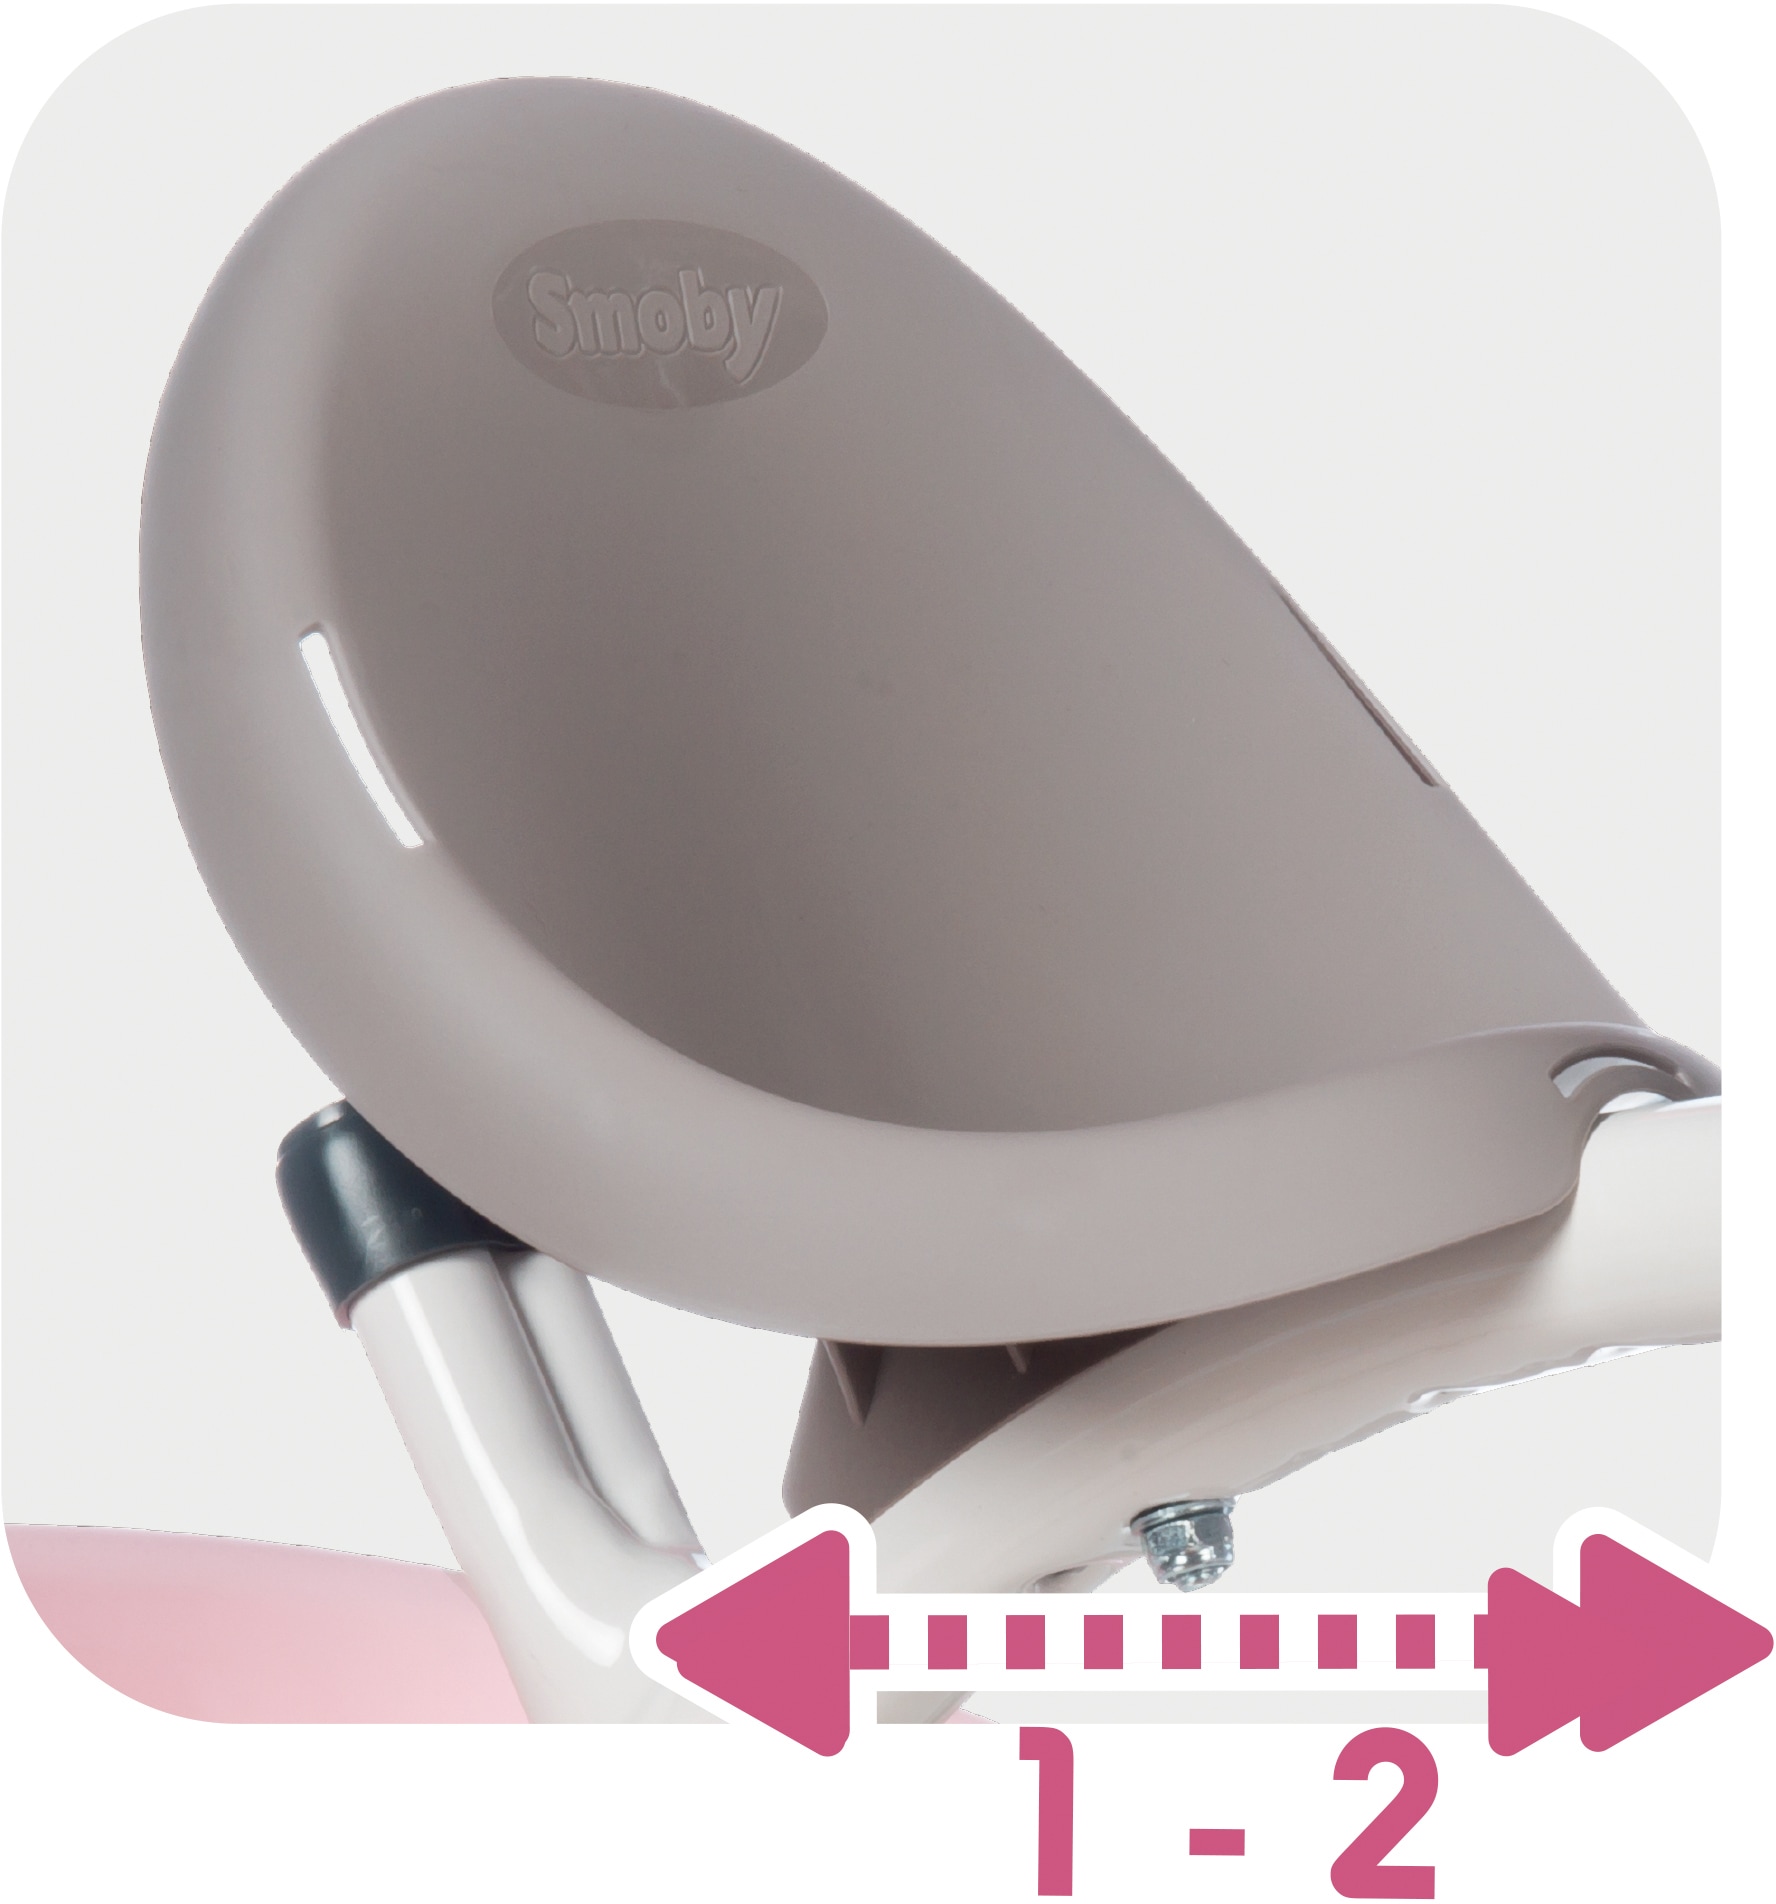 Smoby Dreirad »Baby Balade Plus, rosa«, mit Sonnendach; Made in Europe